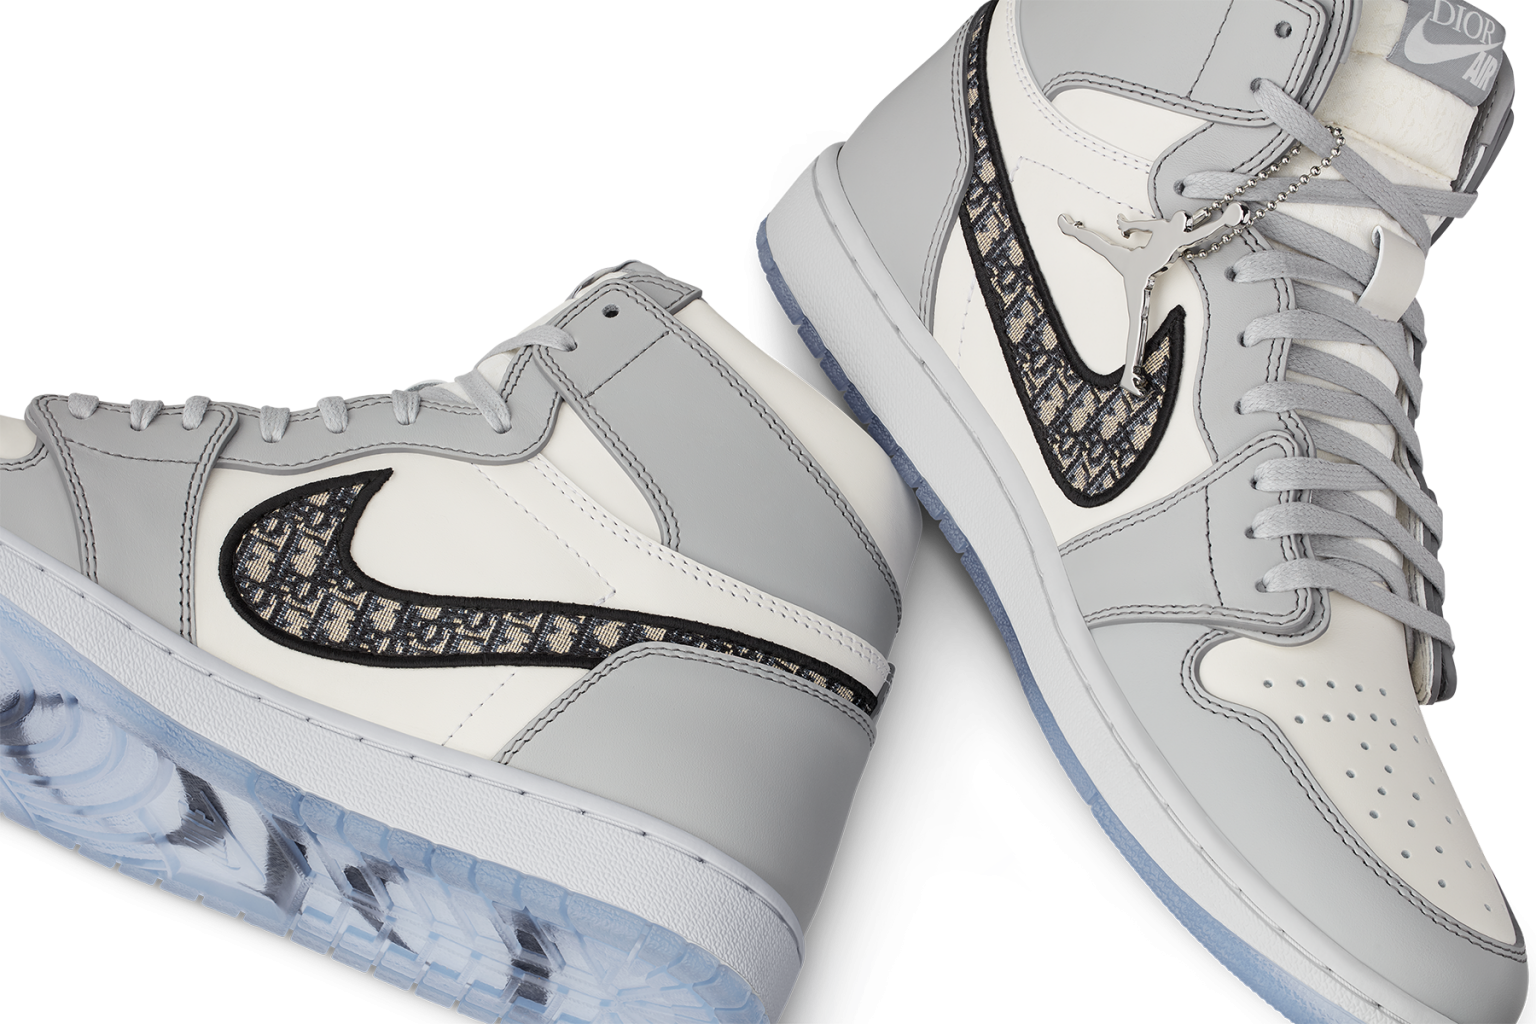 How to get dibs on the highly coveted Air Jordan 1 OD Dior sneakers